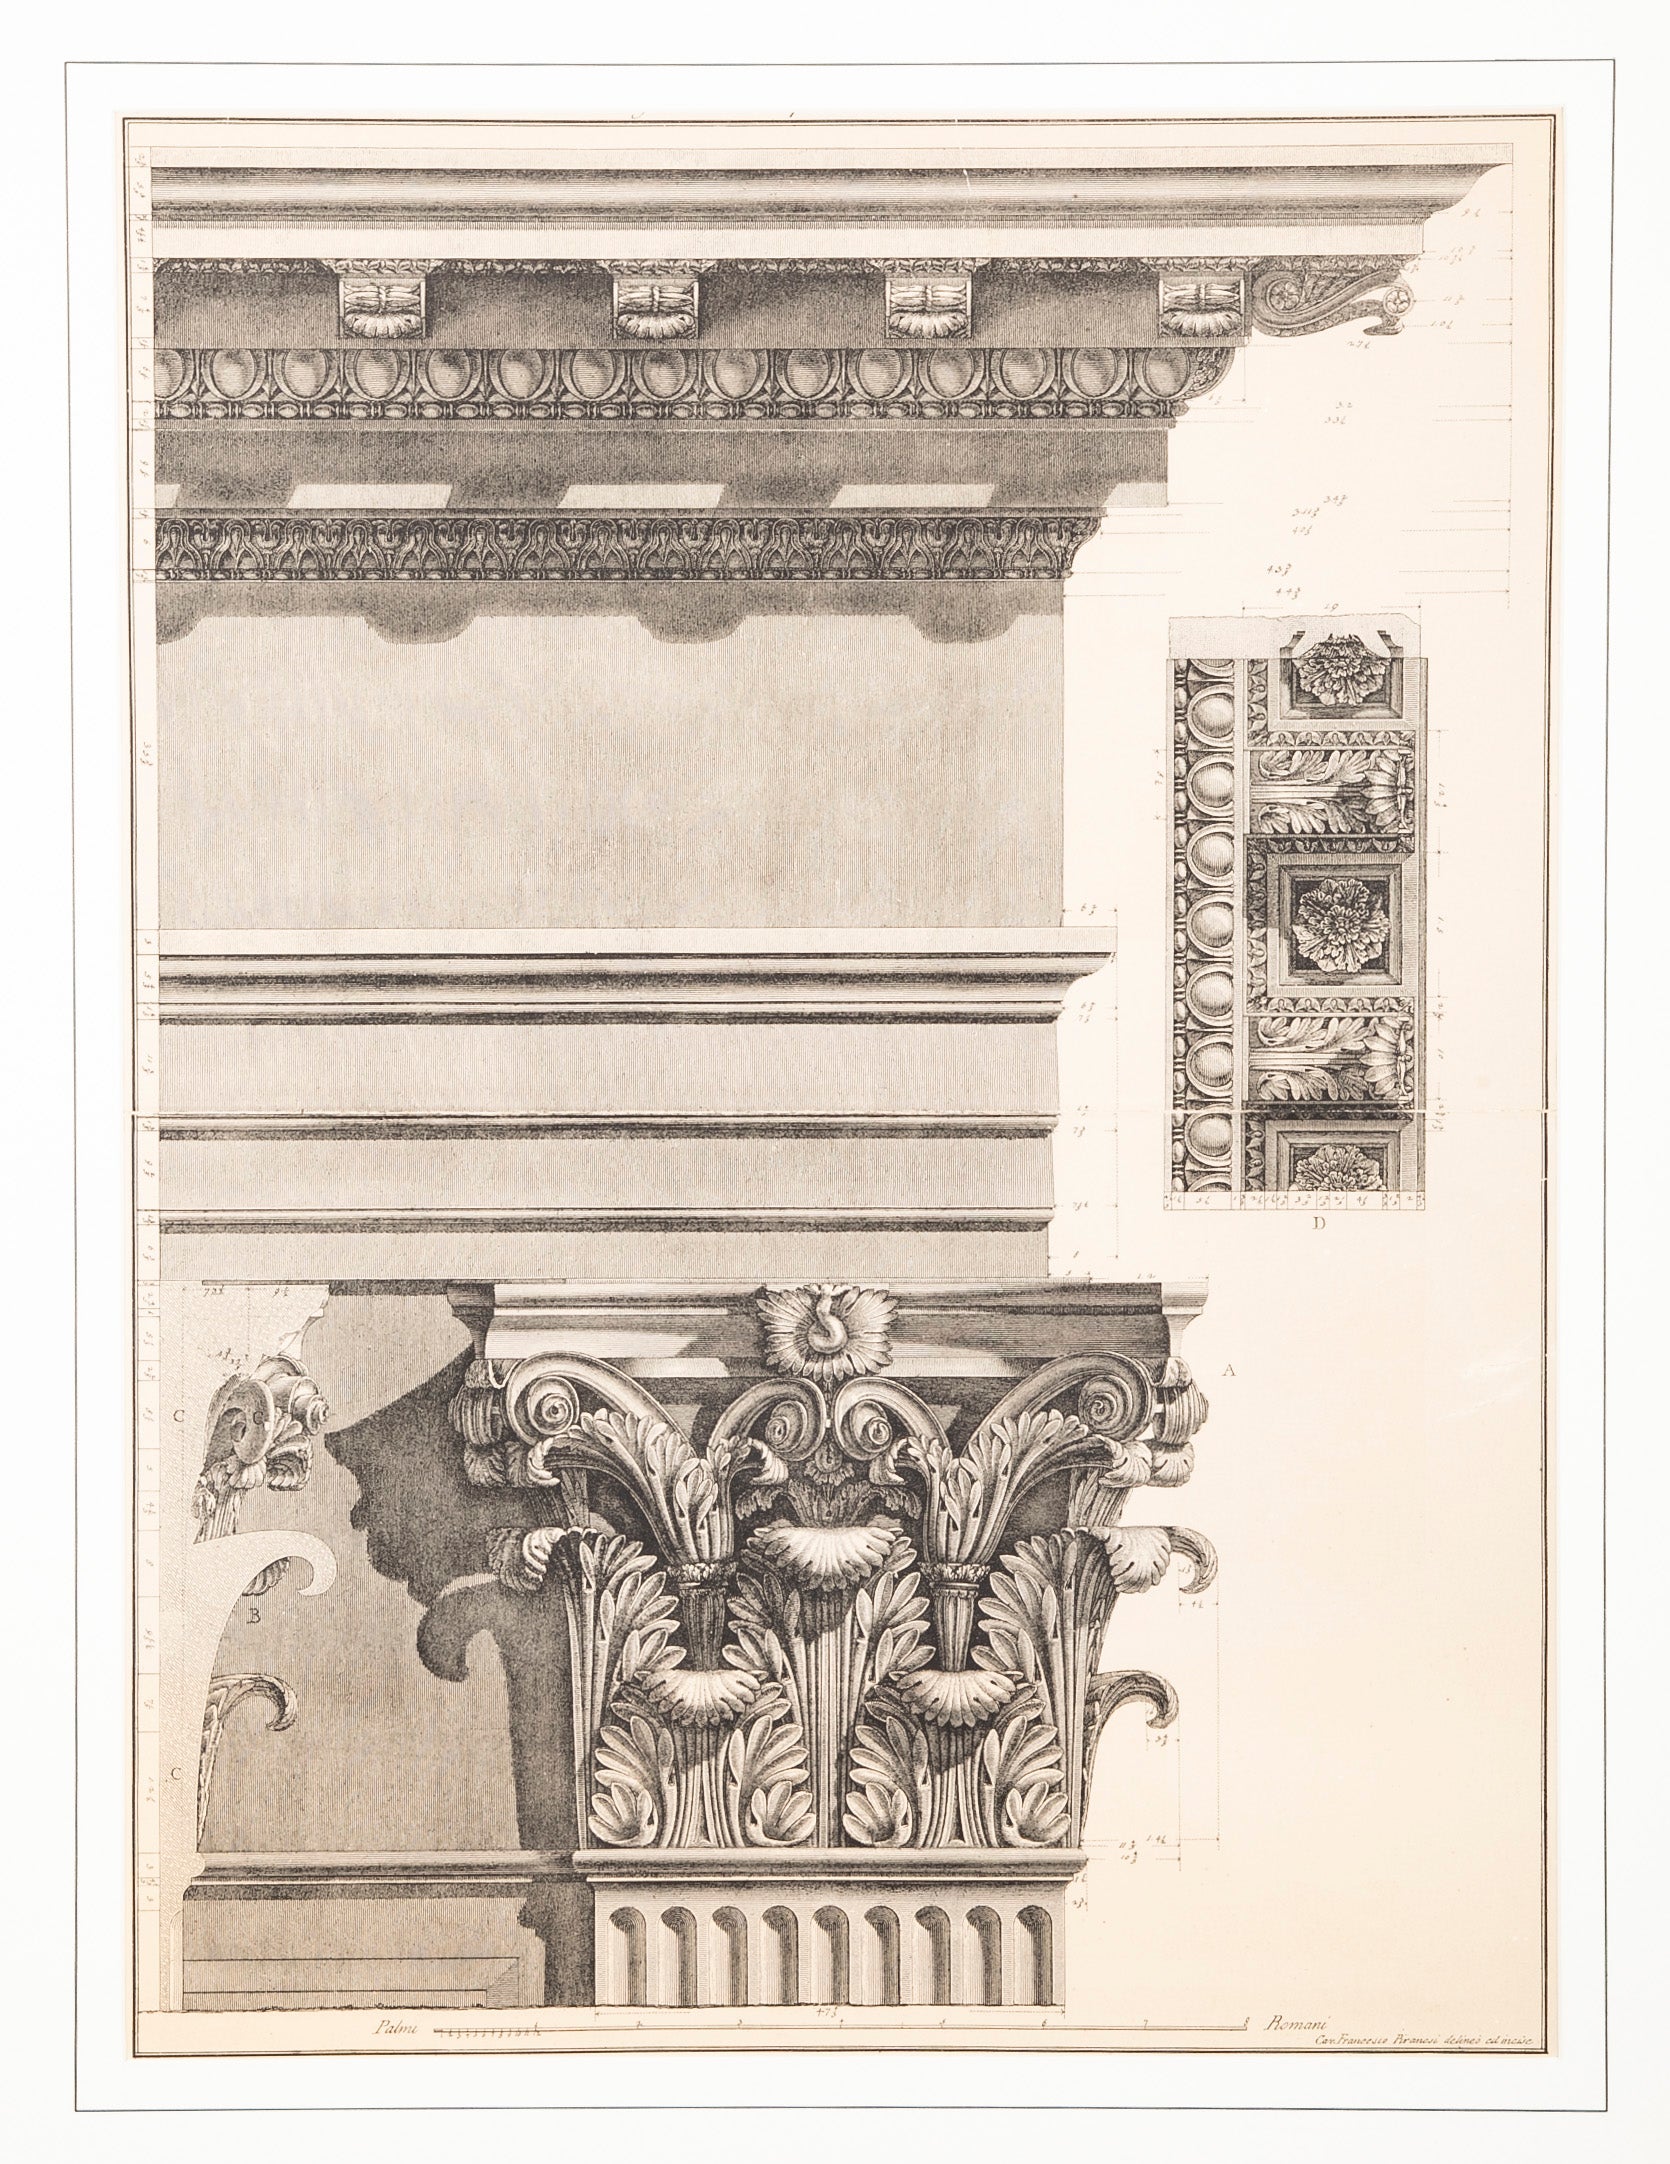 Architectural Etching of a Cornice and Corinthian Capital by Piranesi